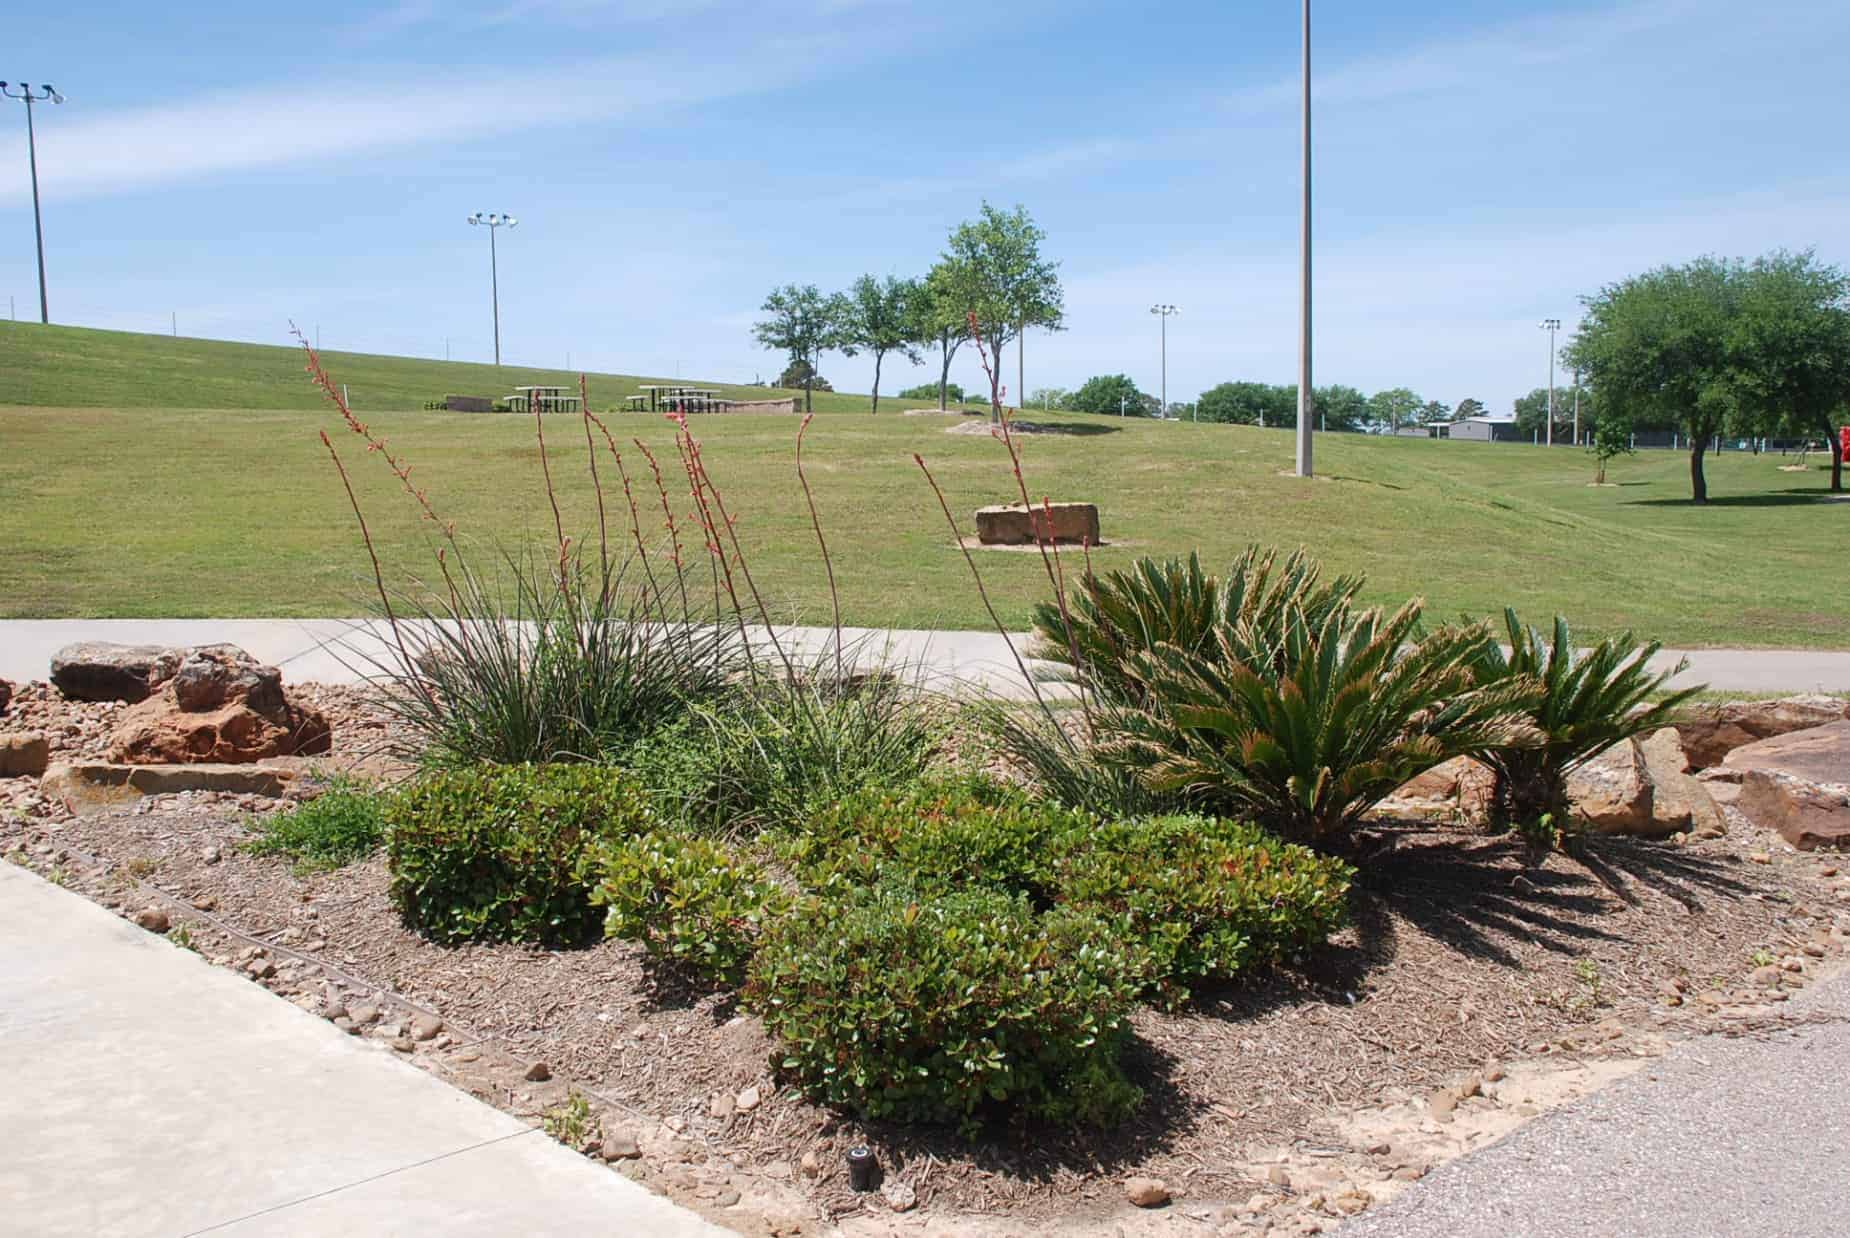 Landscaping at Hockley Recreational Complex Hockley TX